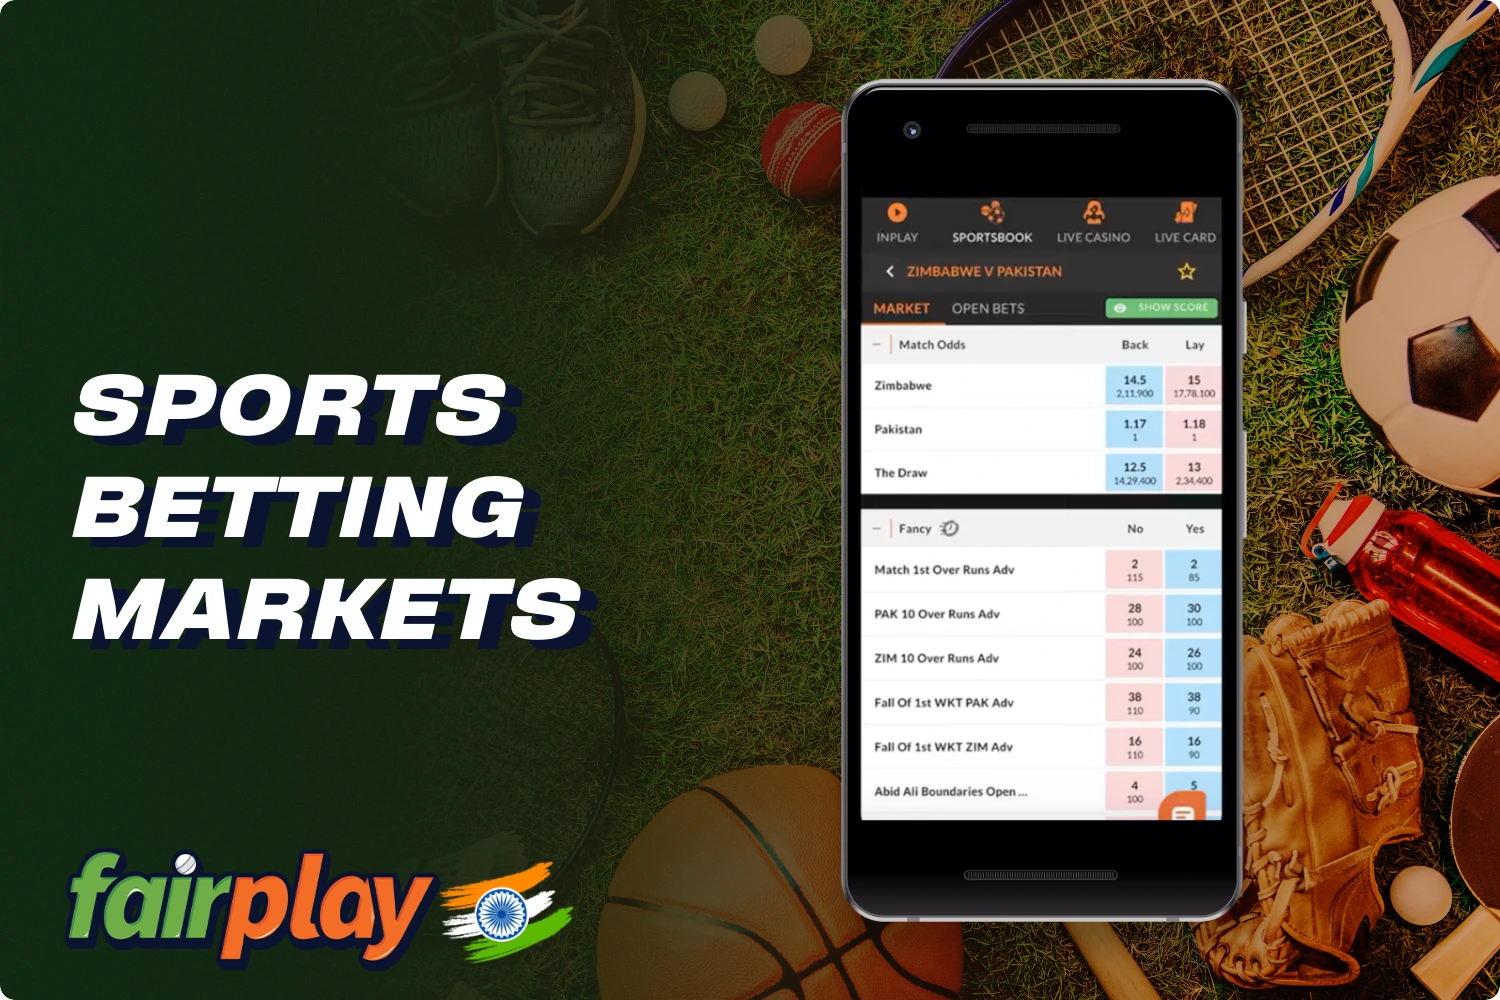 There is a wide betting market available on the Fairplay platform